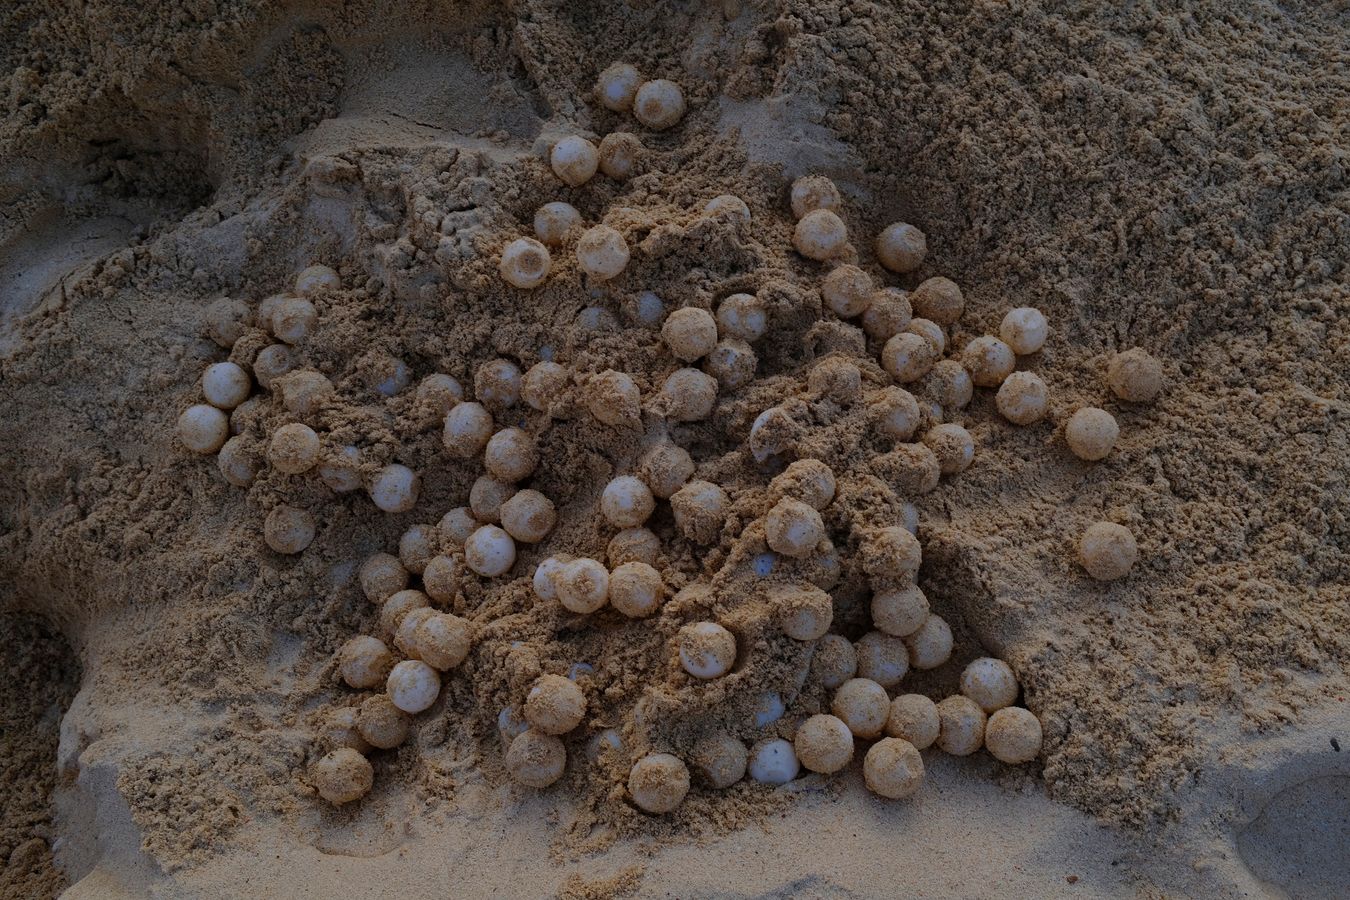 Sea turtle eggs freshly laid and freshly removed from their nest.